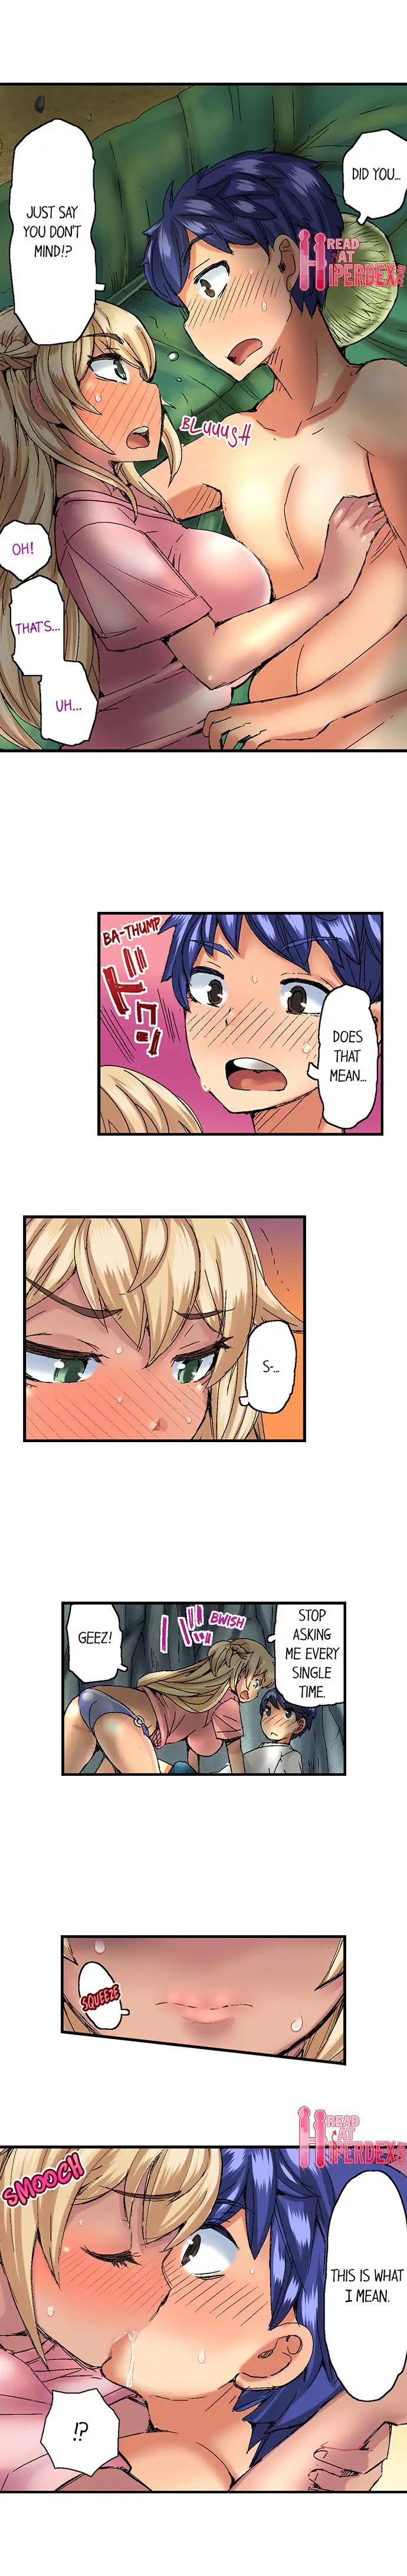 Taking a Hot Tanned Chick’s Virginity - Chapter 10 Page 9